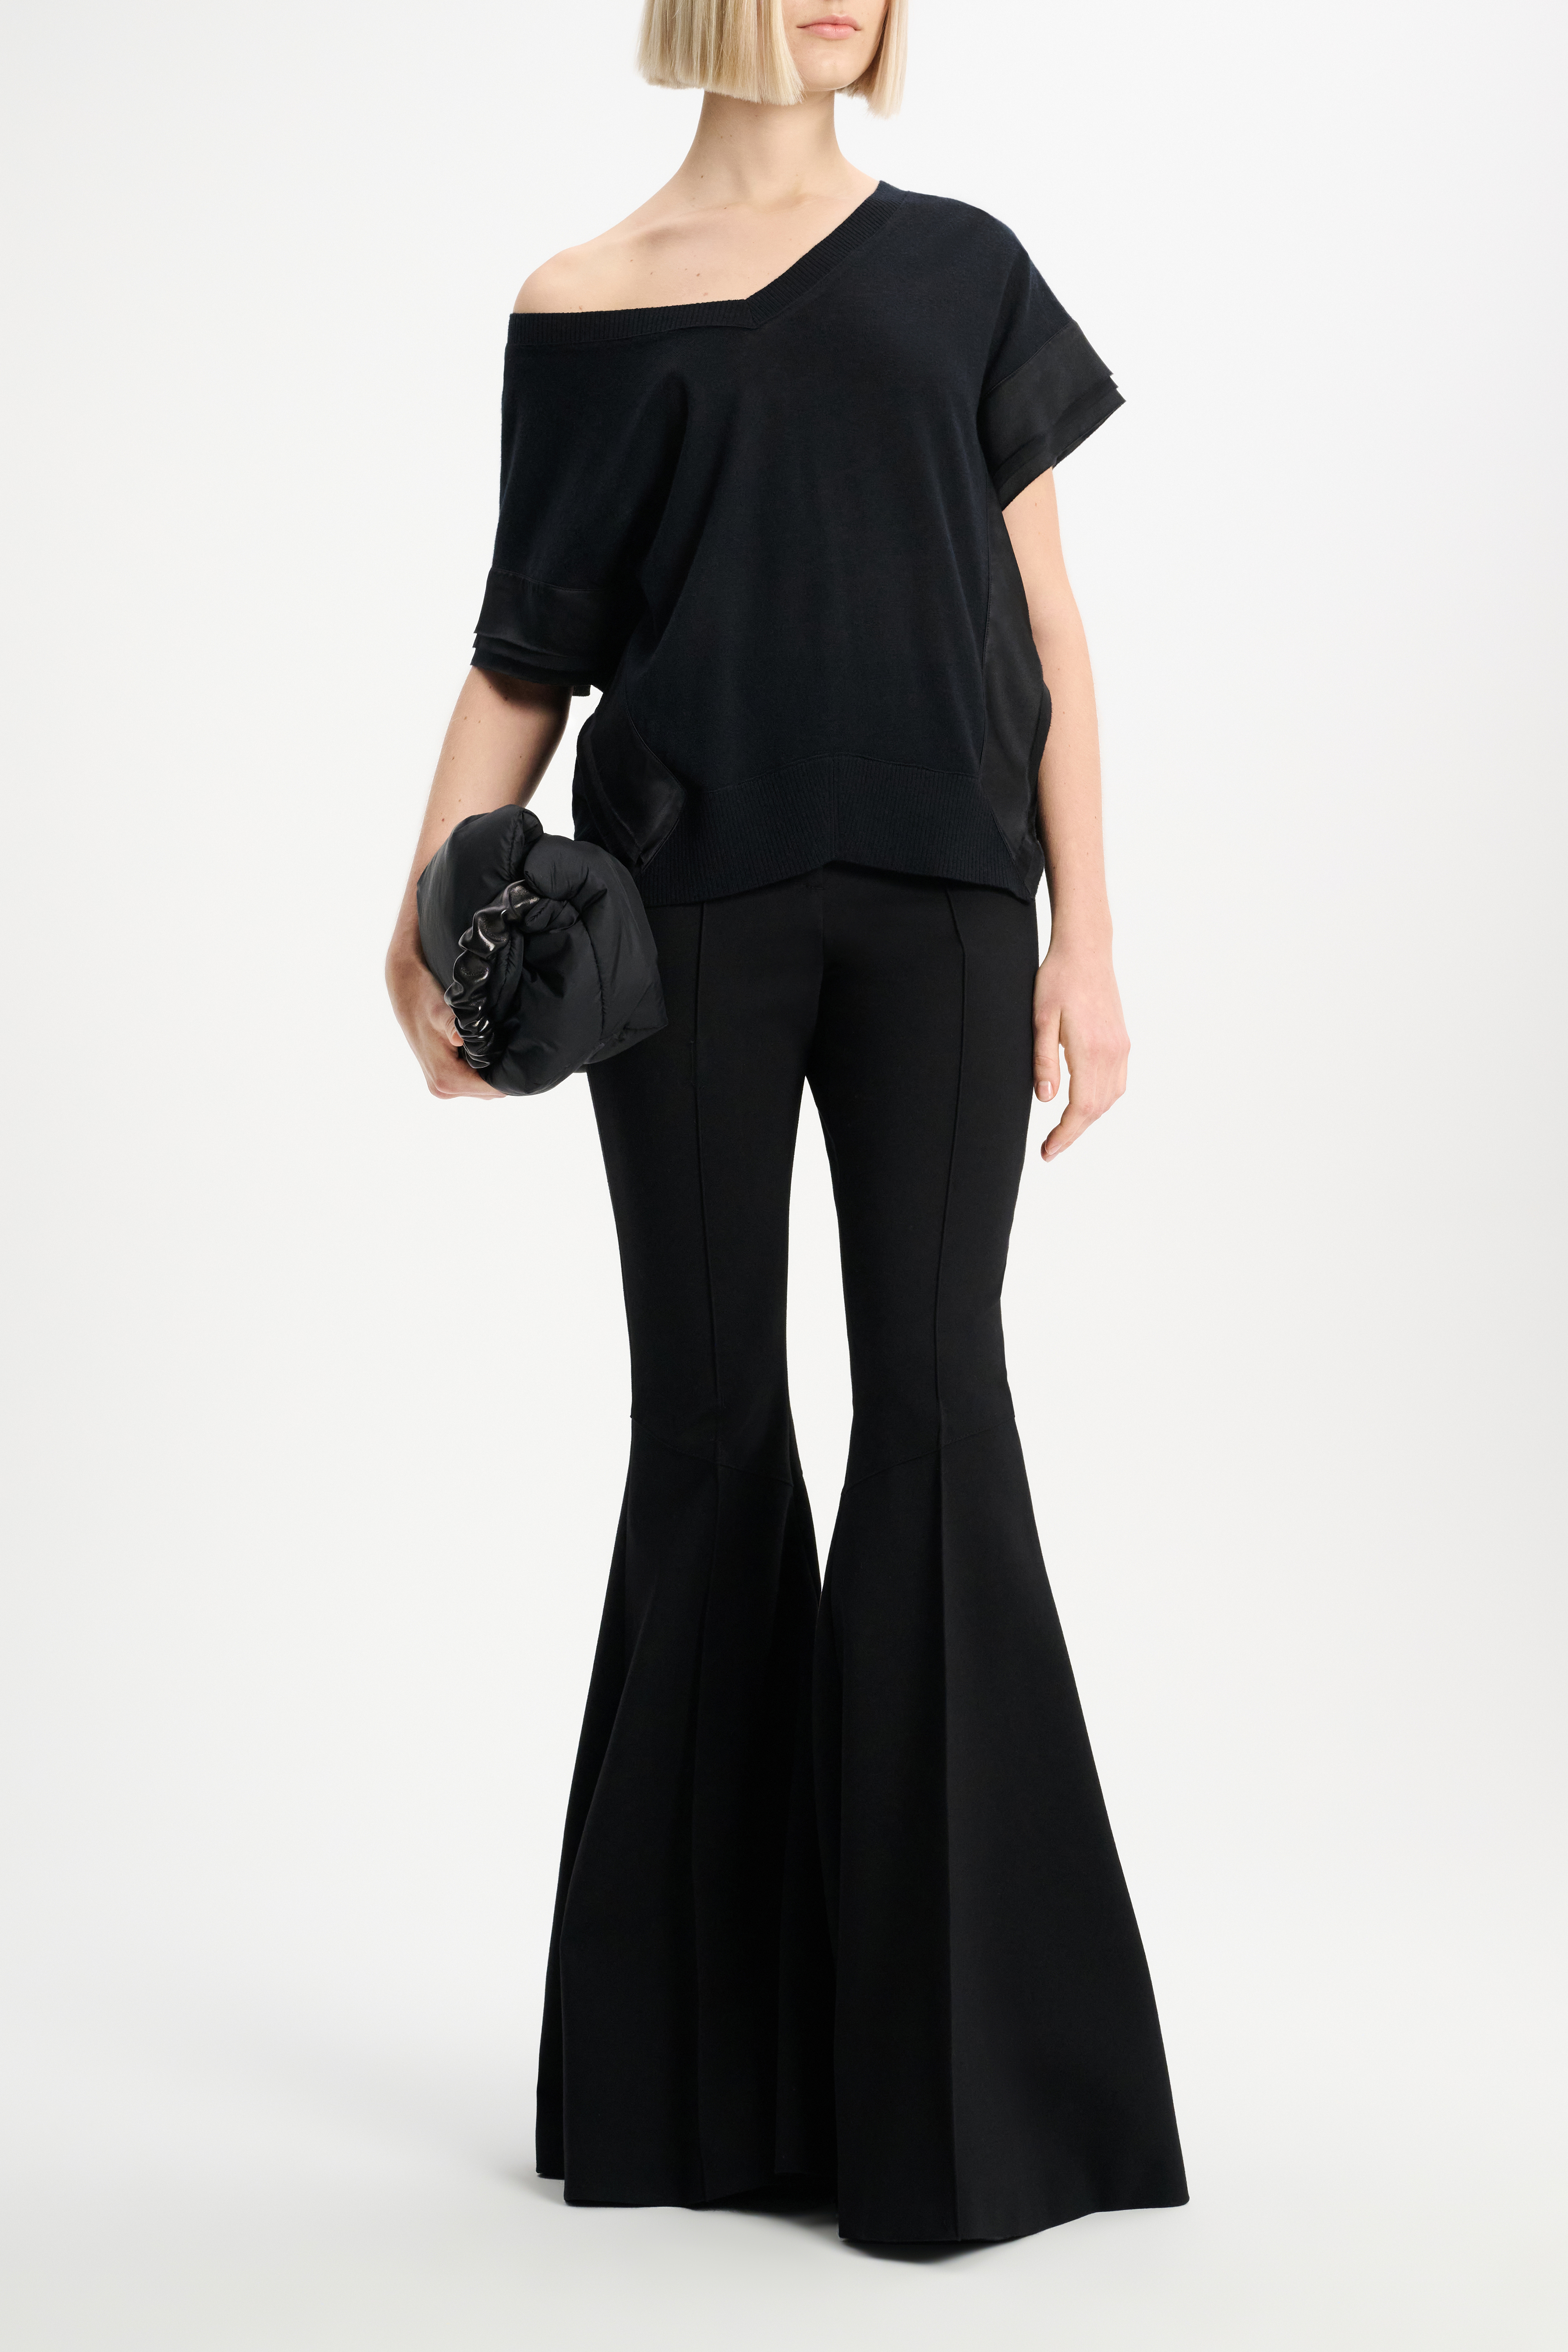 Dorothee Schumacher Wool-cashmere knit top with layered satin